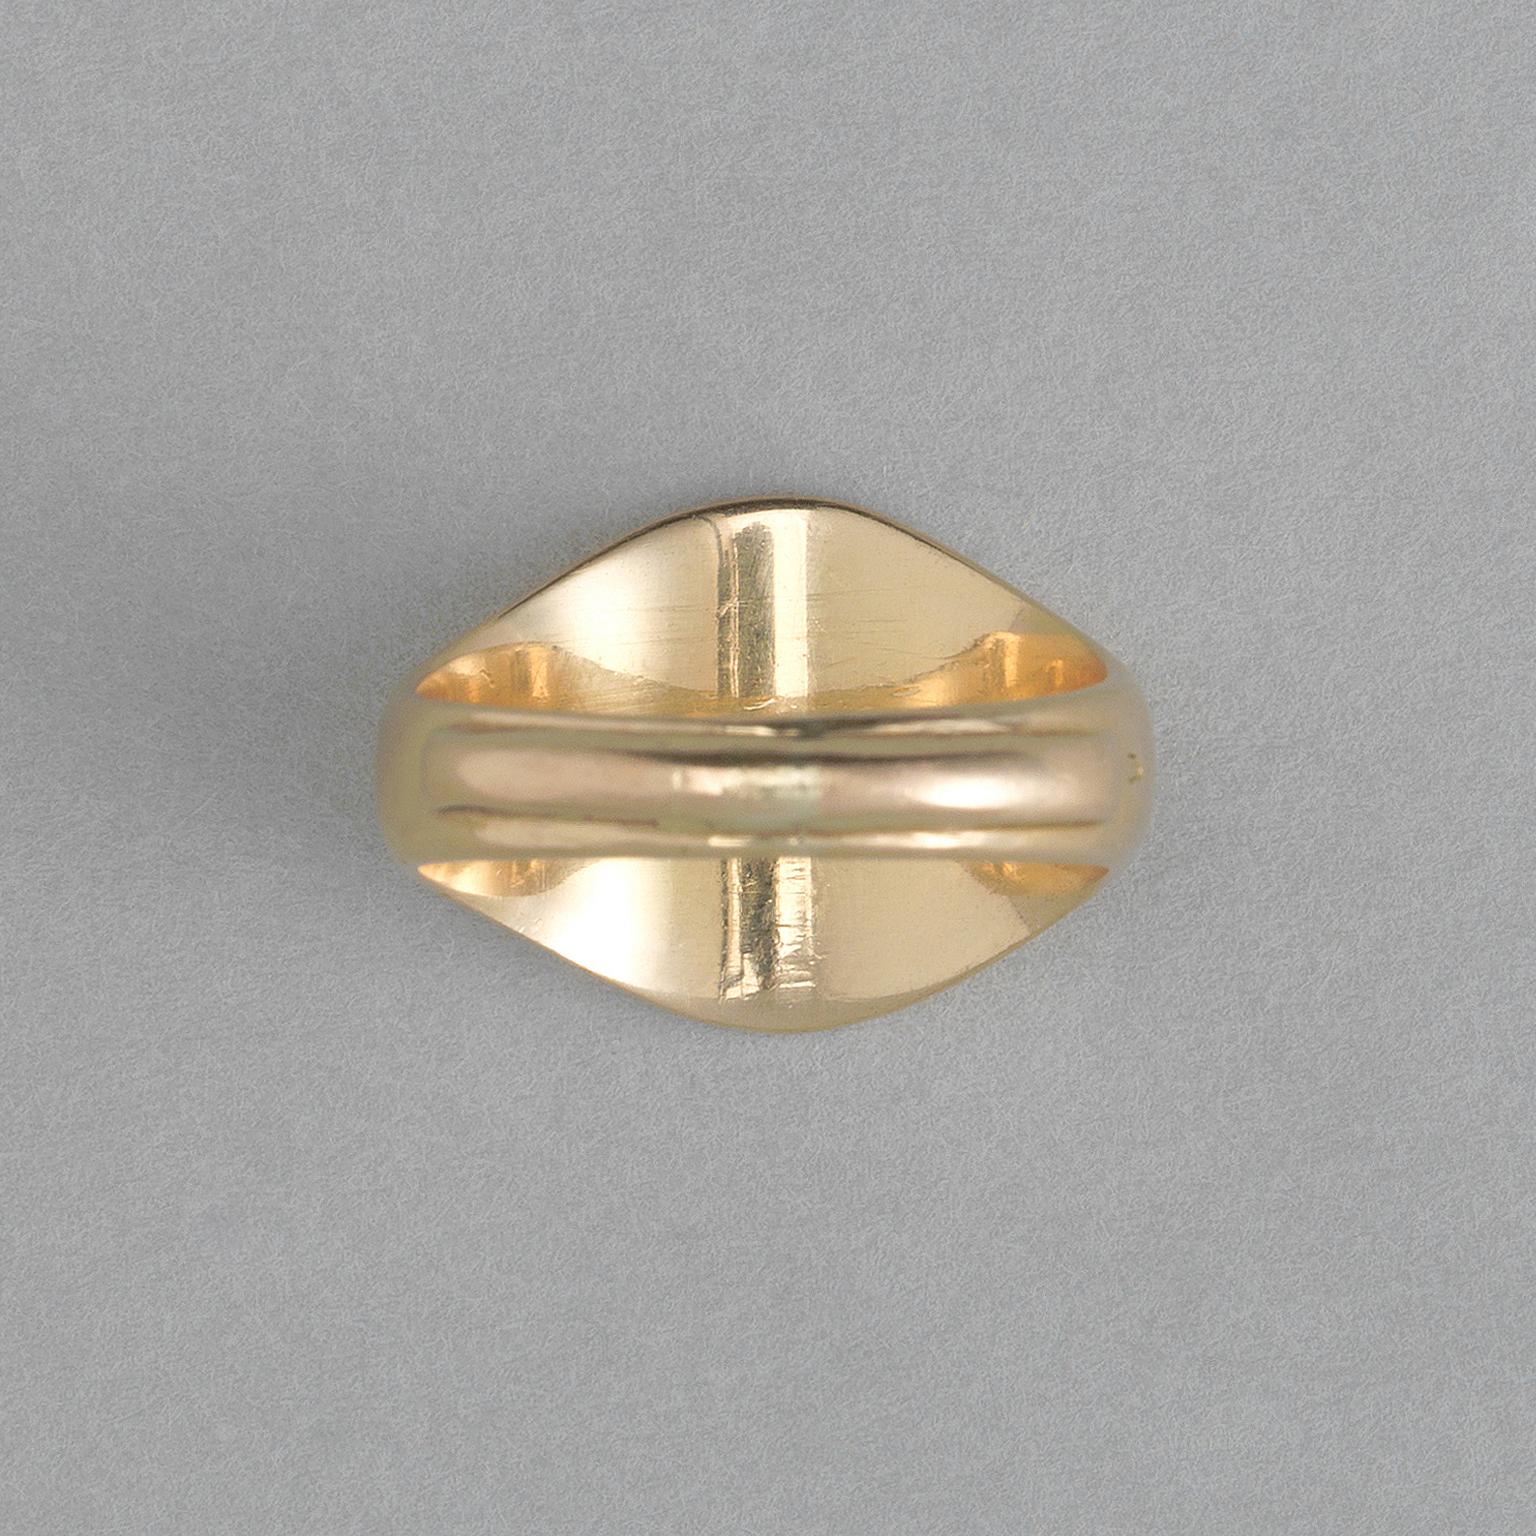 An 18 carat gold seal ring with the symbol of the aquarius zodiac, master mark: Jean Després, France.

weight: 9.5 grams
ring size: 17.5 mm. / 7.5 US